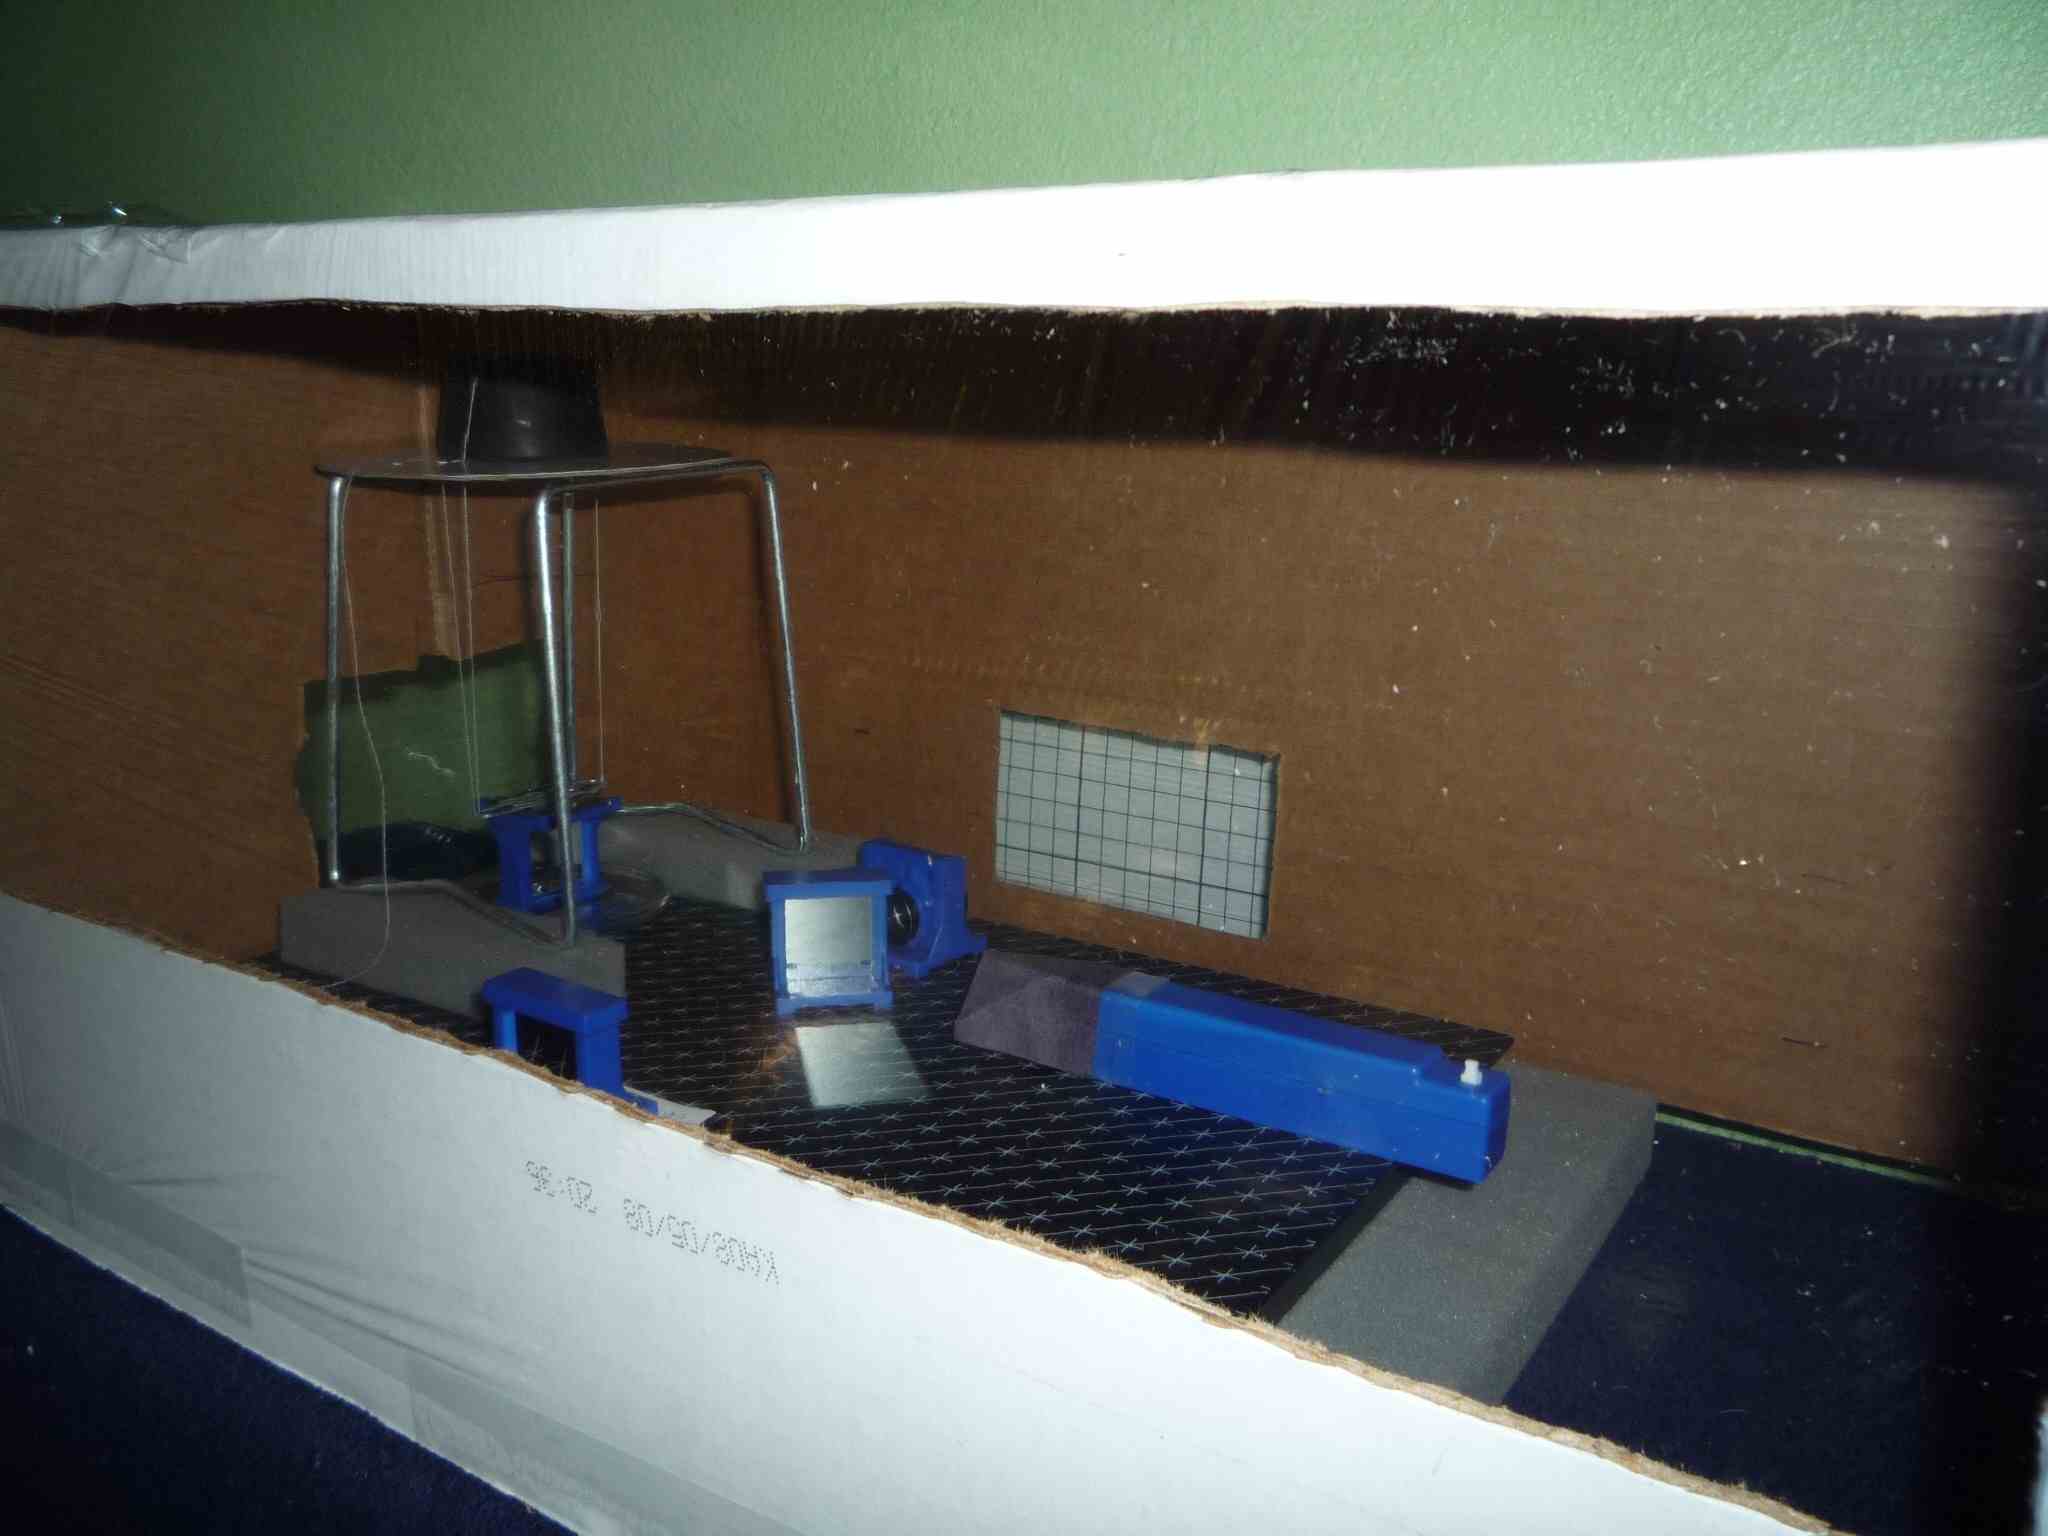 Interferometer setup 2, with cover